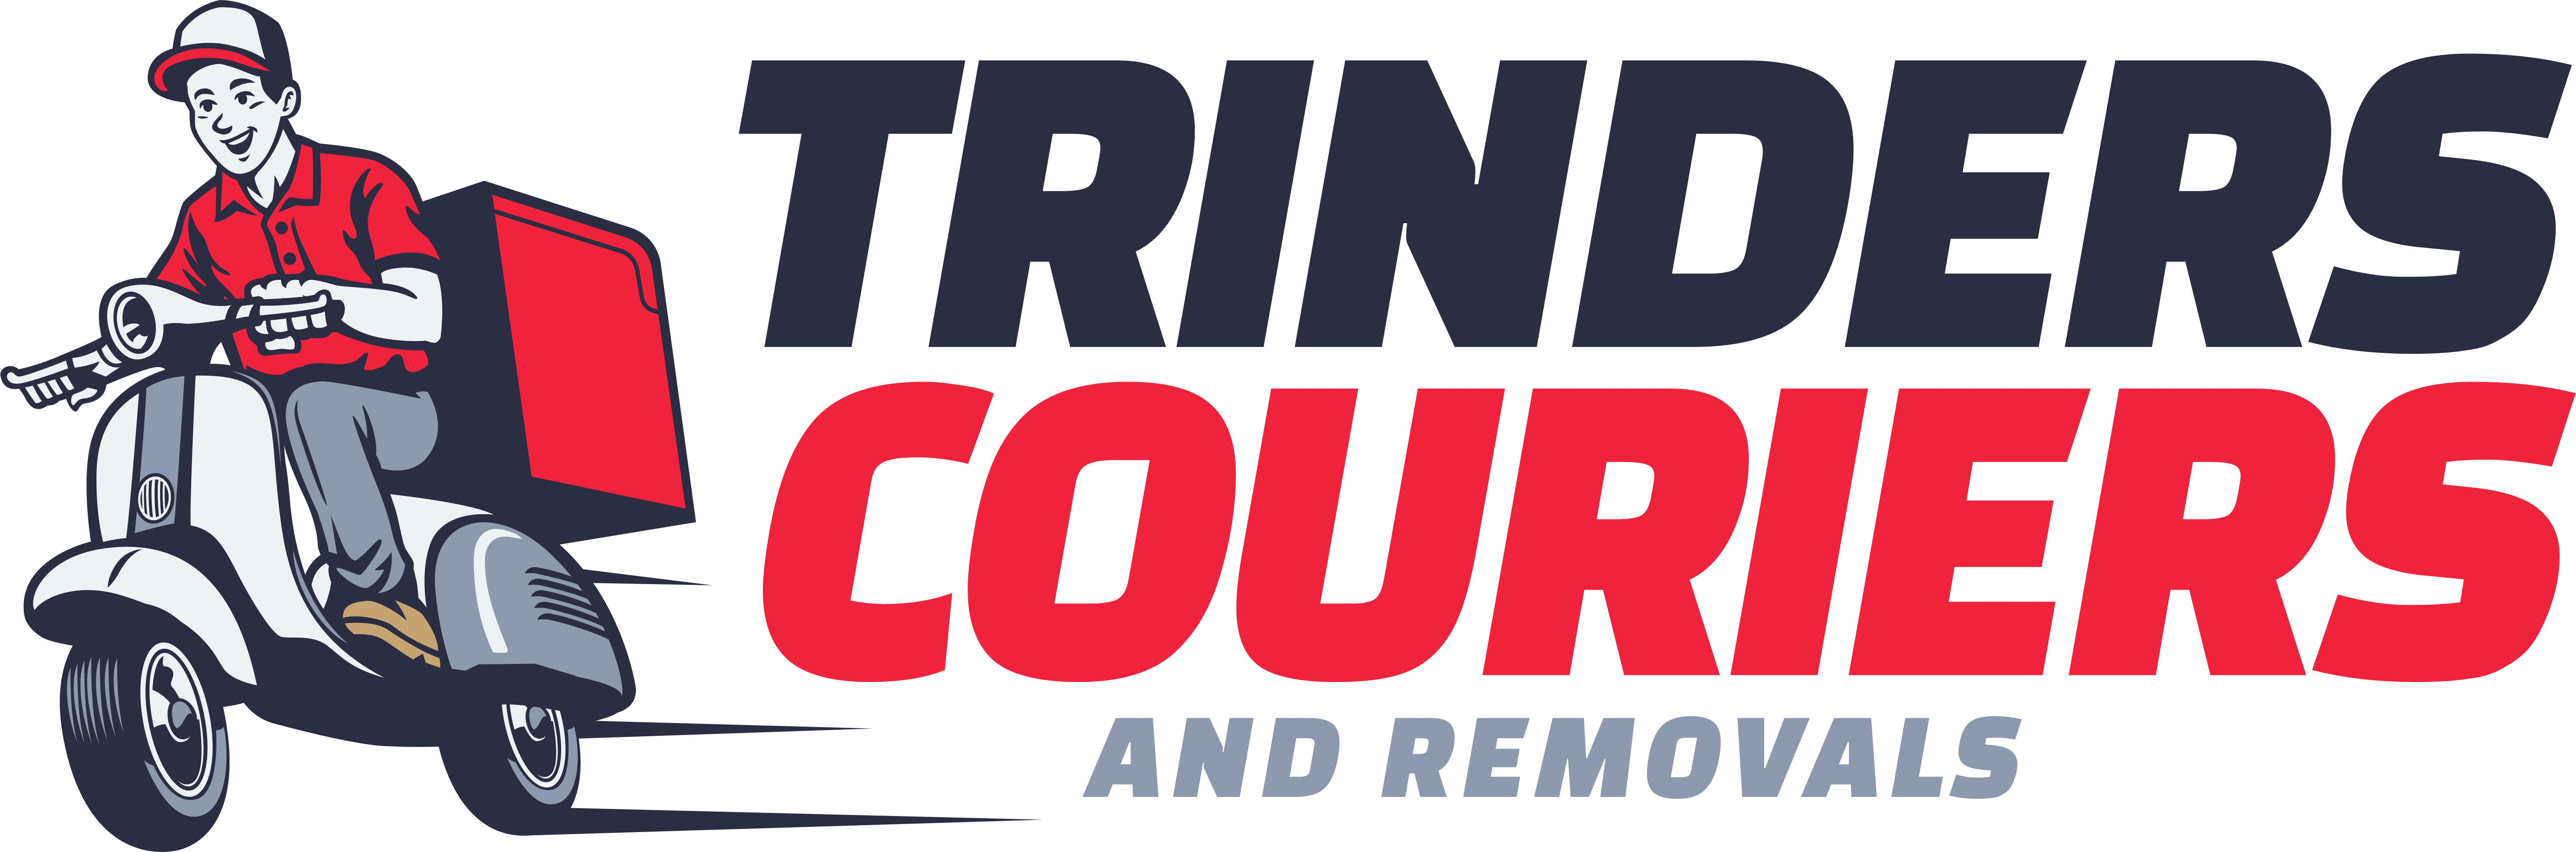 Trinders Courier & Removal Services Ltd logo